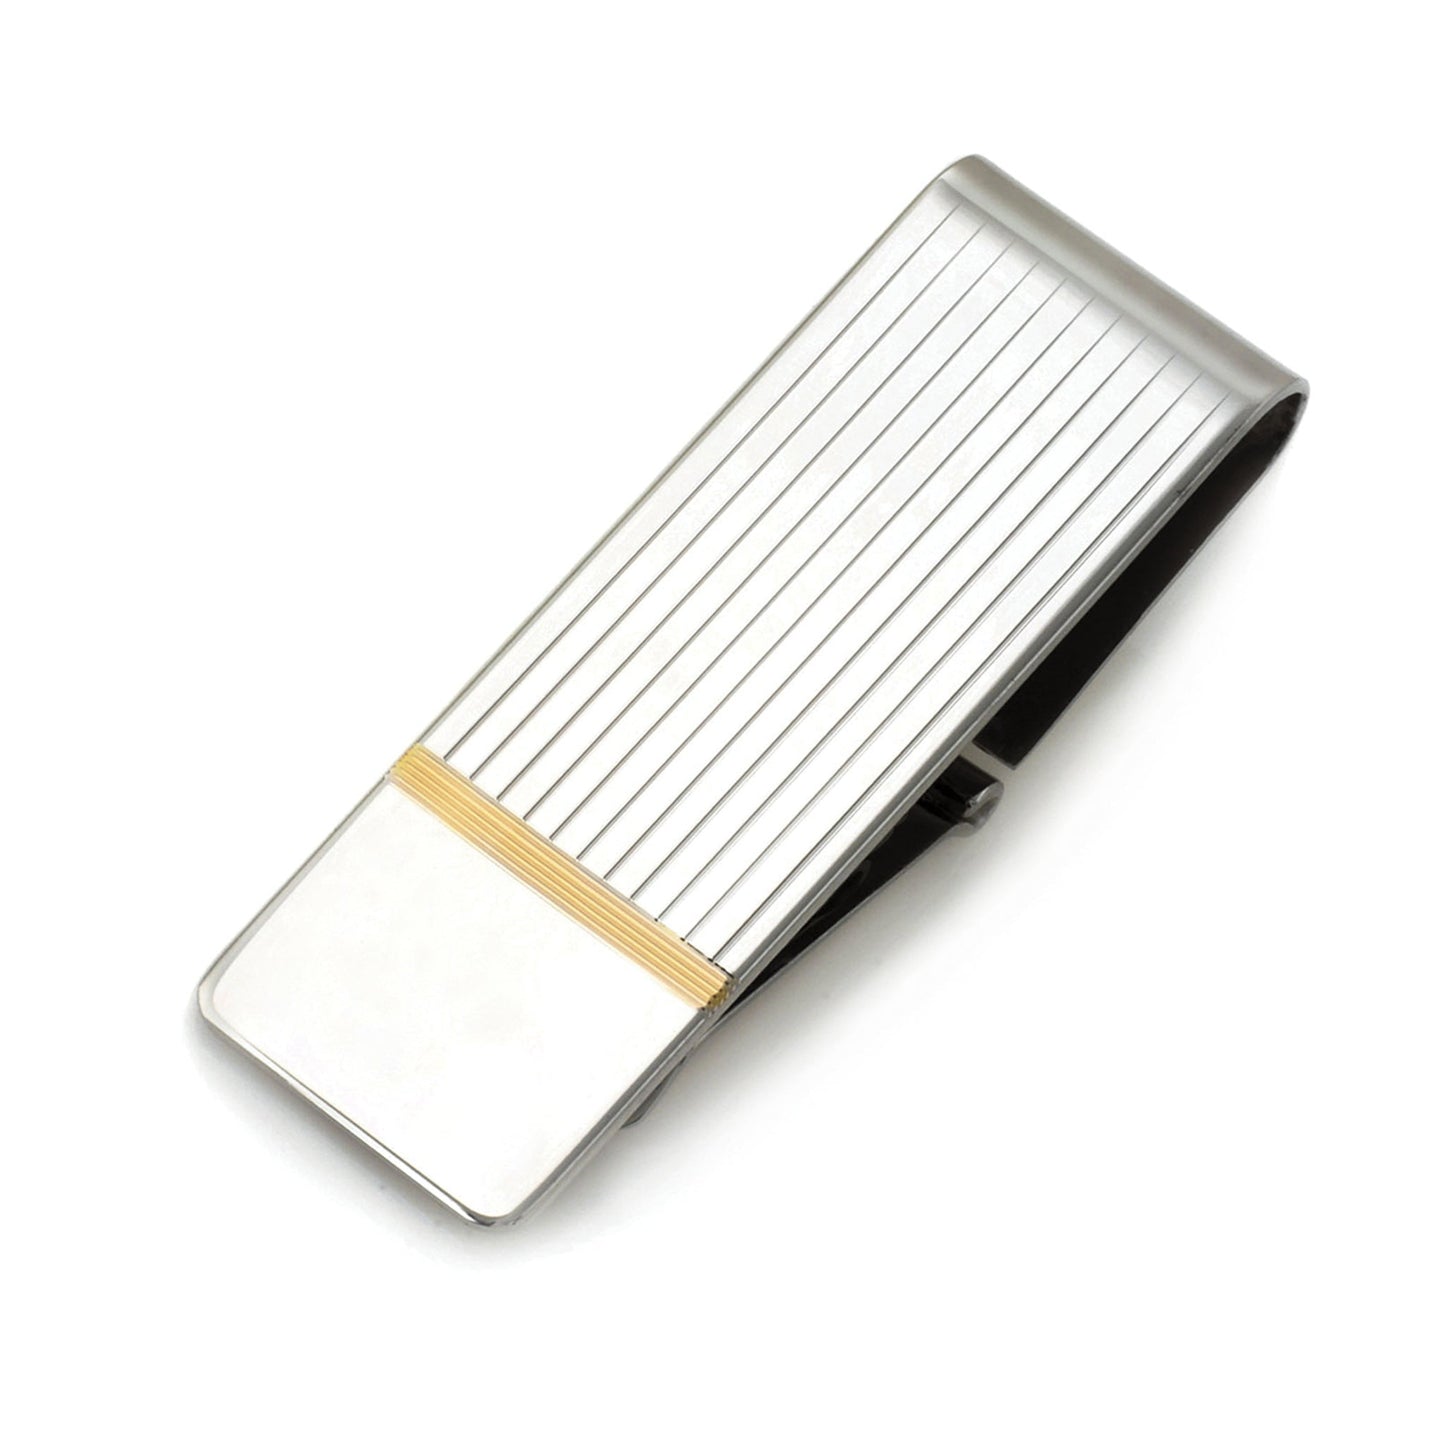 A sterling silver hinged money clip with gold accents displayed on a neutral white background.